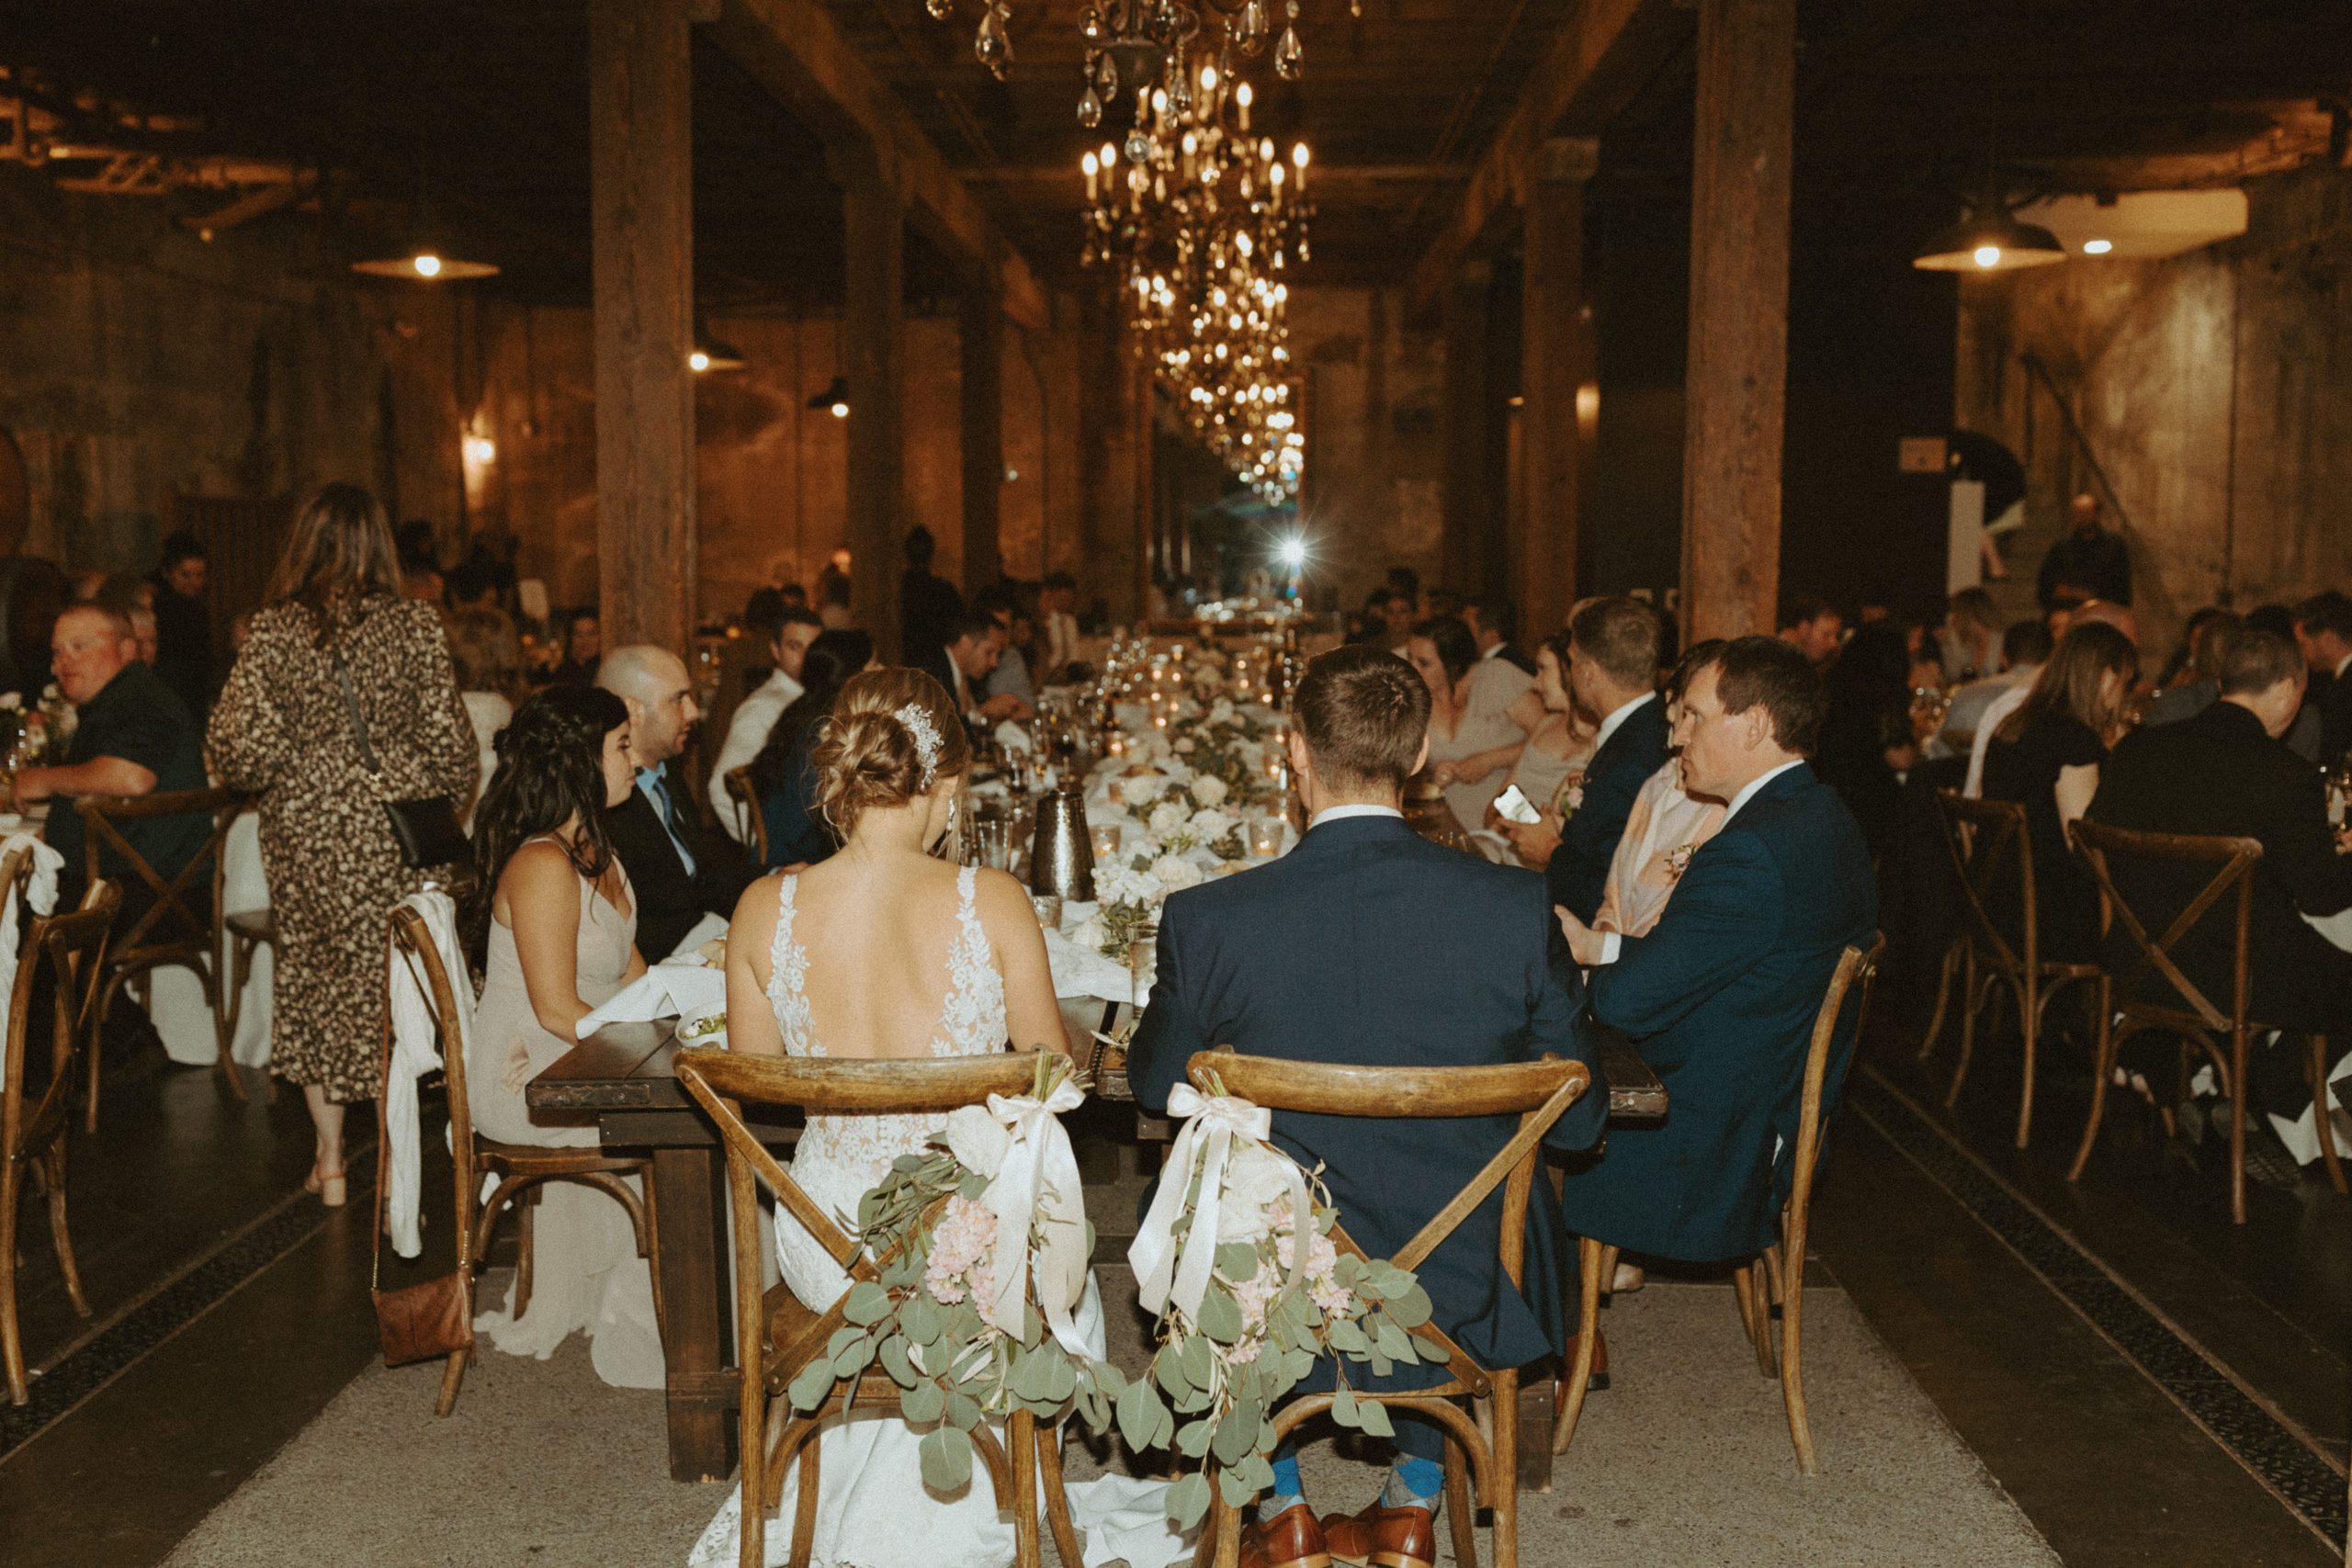 the couple sitting and enjoying their reception at their venue in California